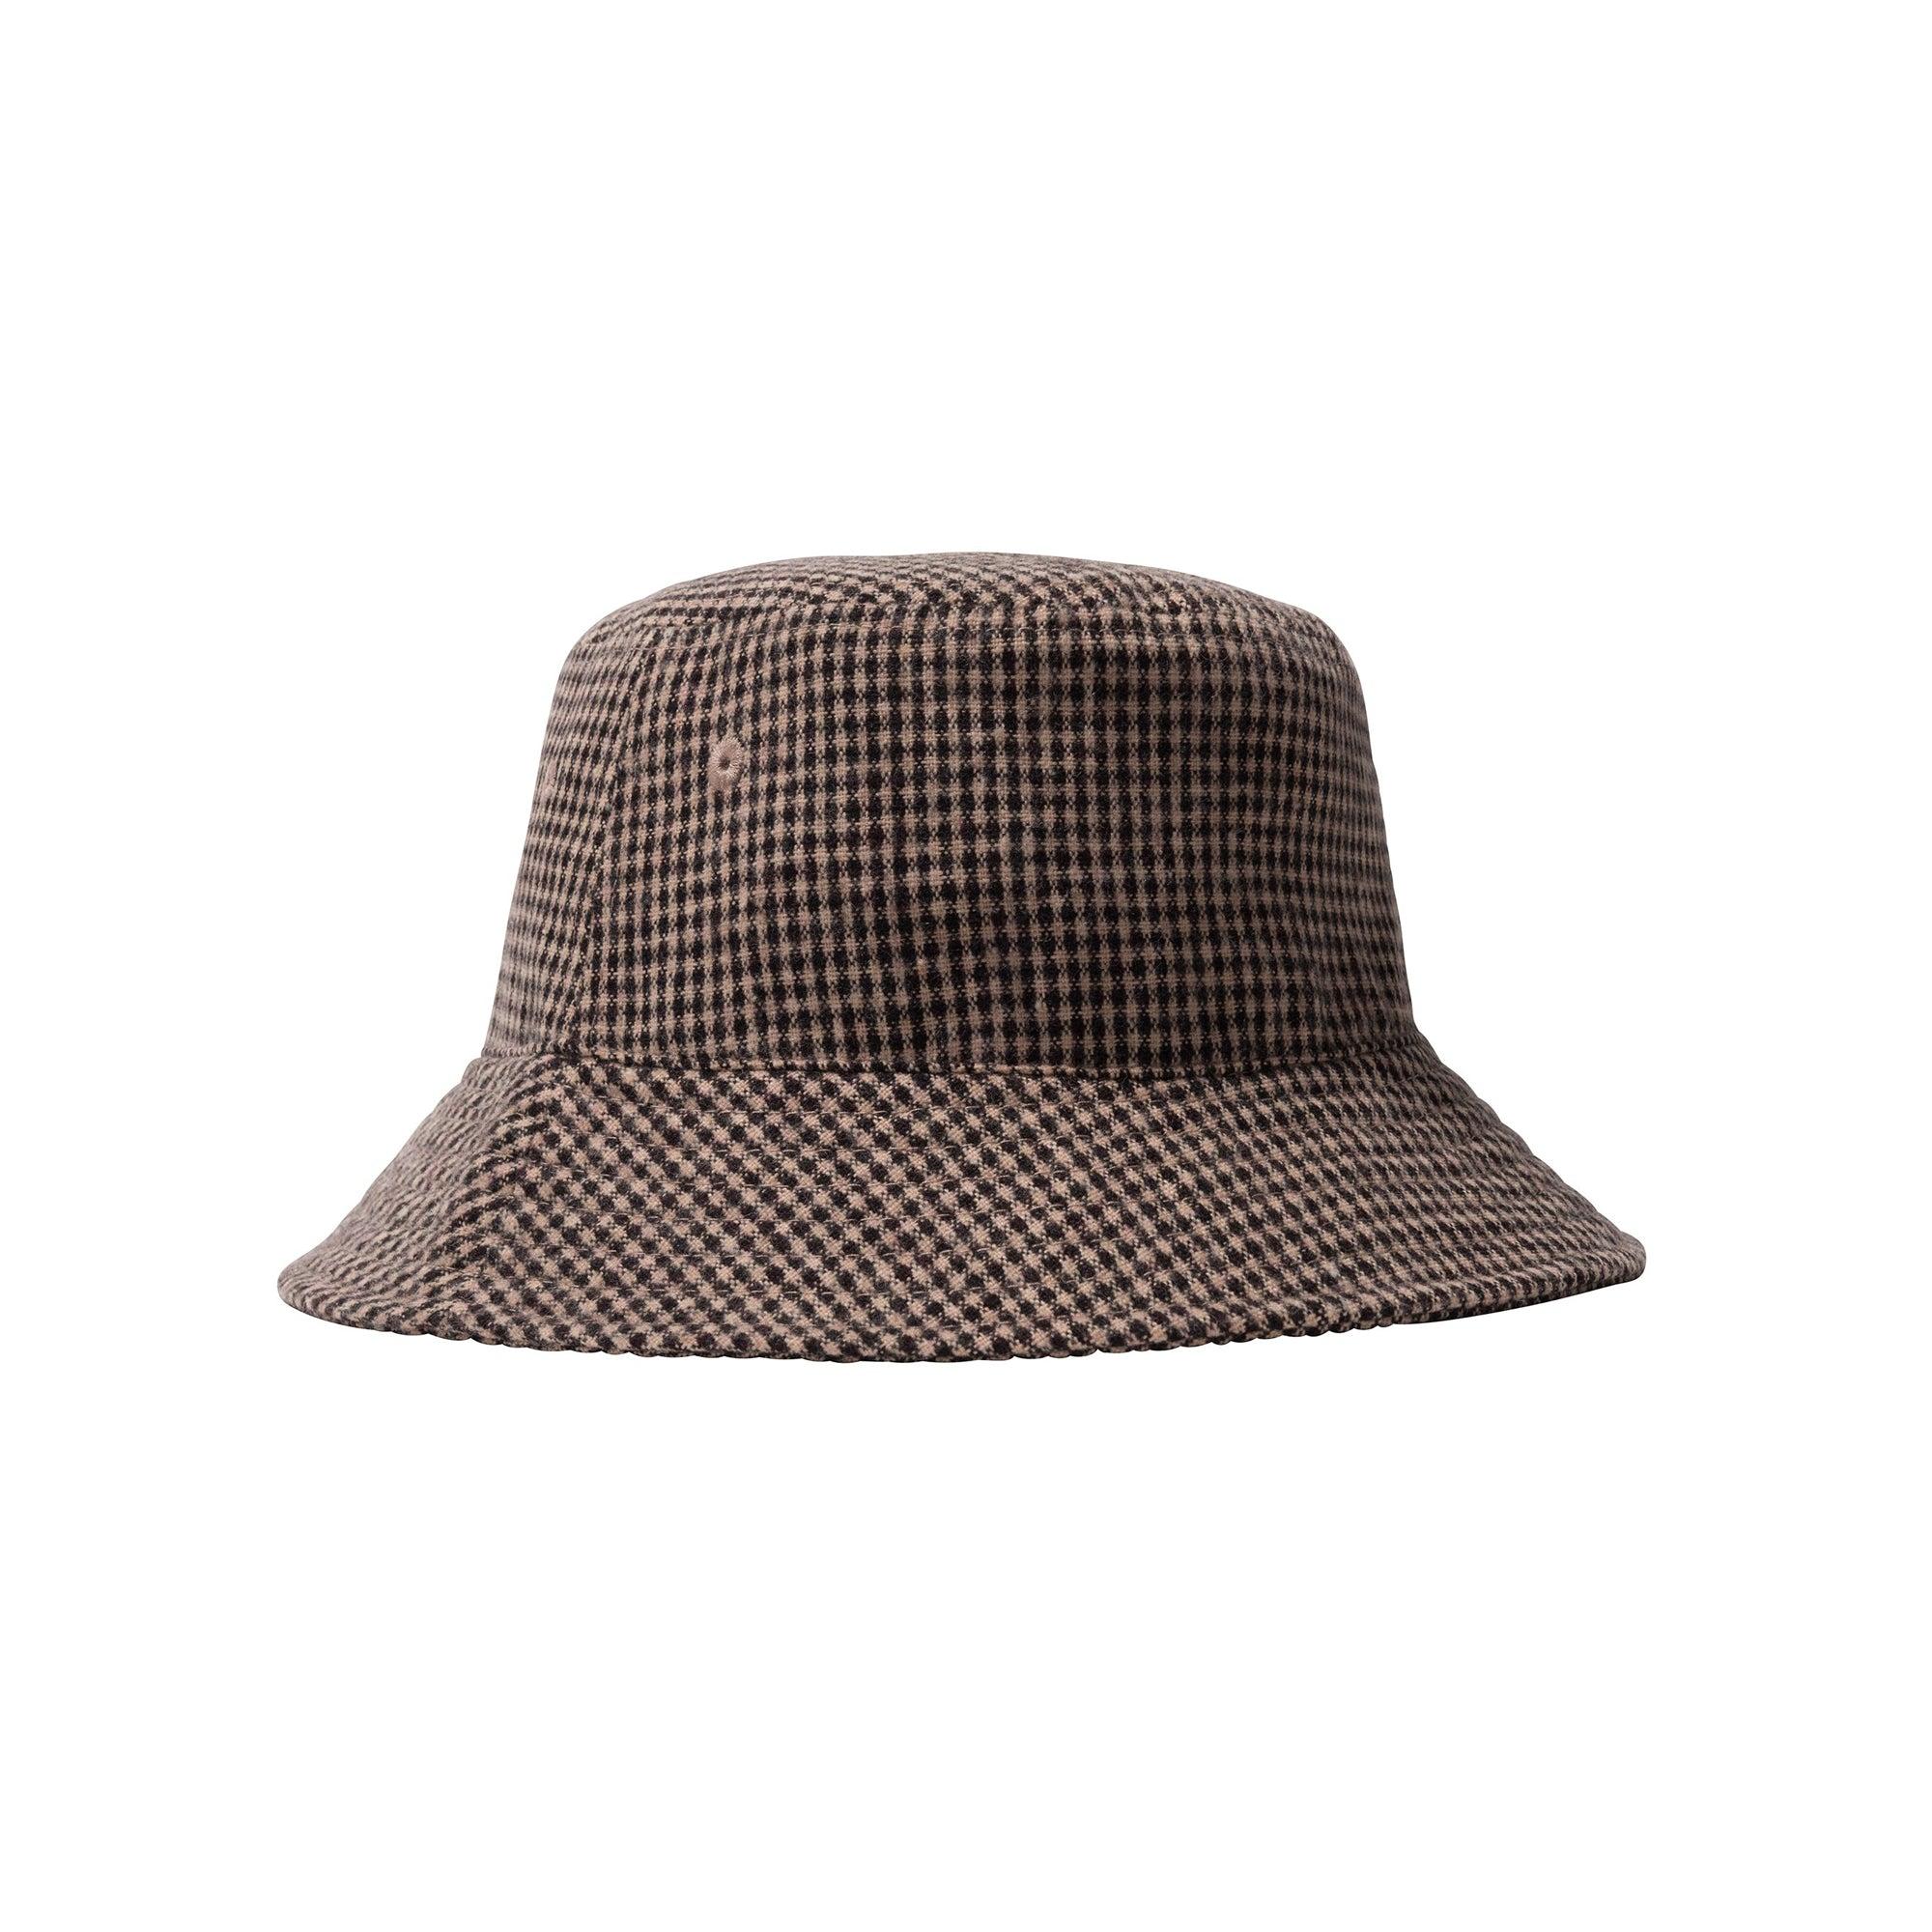 Stussy Stussy Wool Check Big Stock Bucket Hat in Brown for Men 